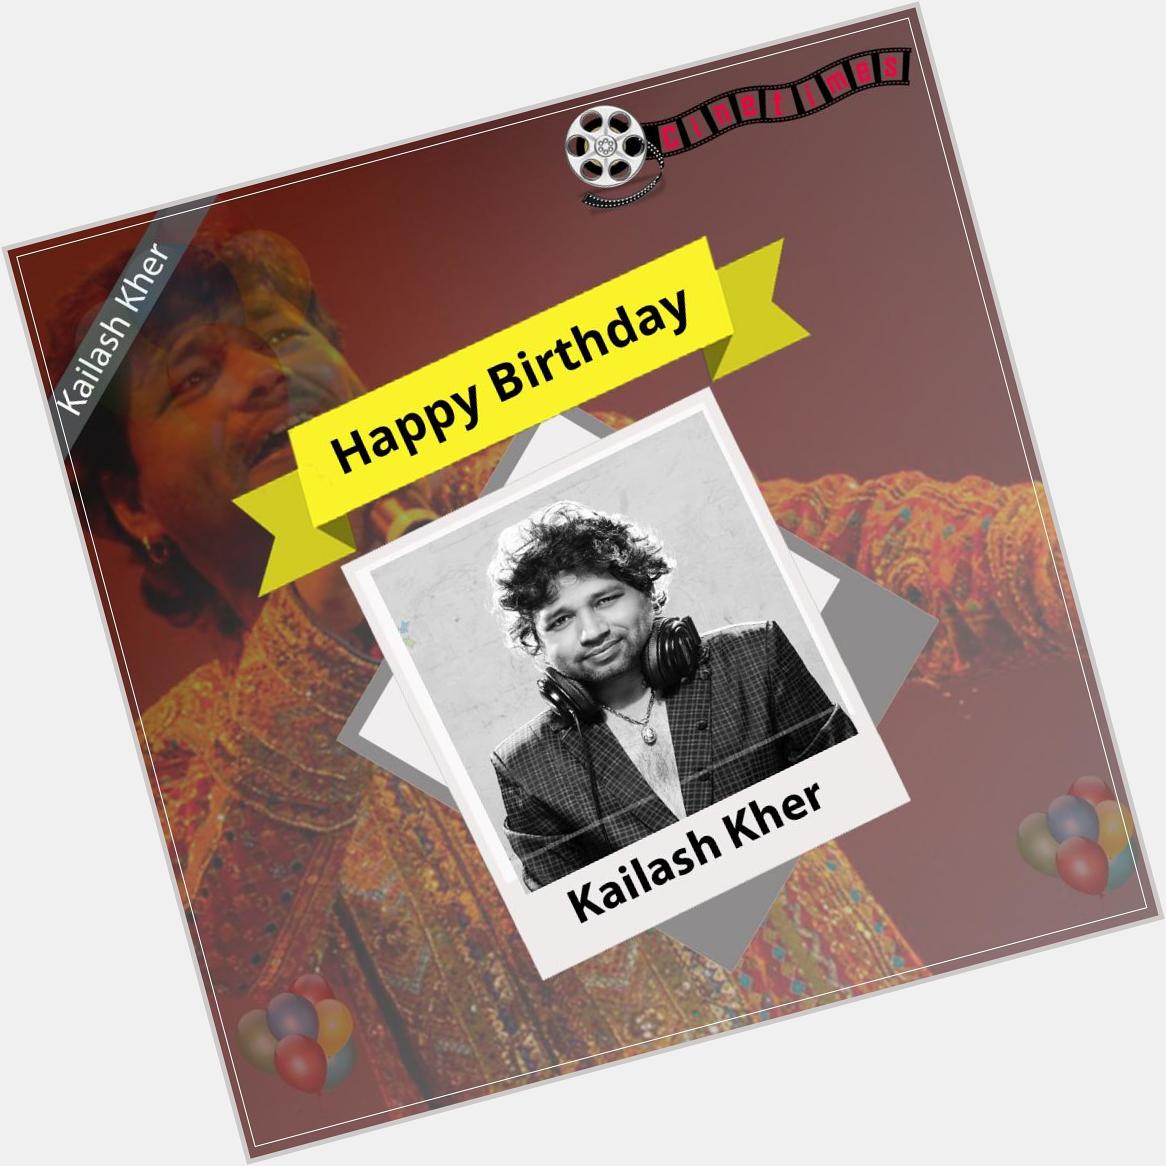 Join us in Wishing Singer Kailash Kher A Very Happy Birthday 